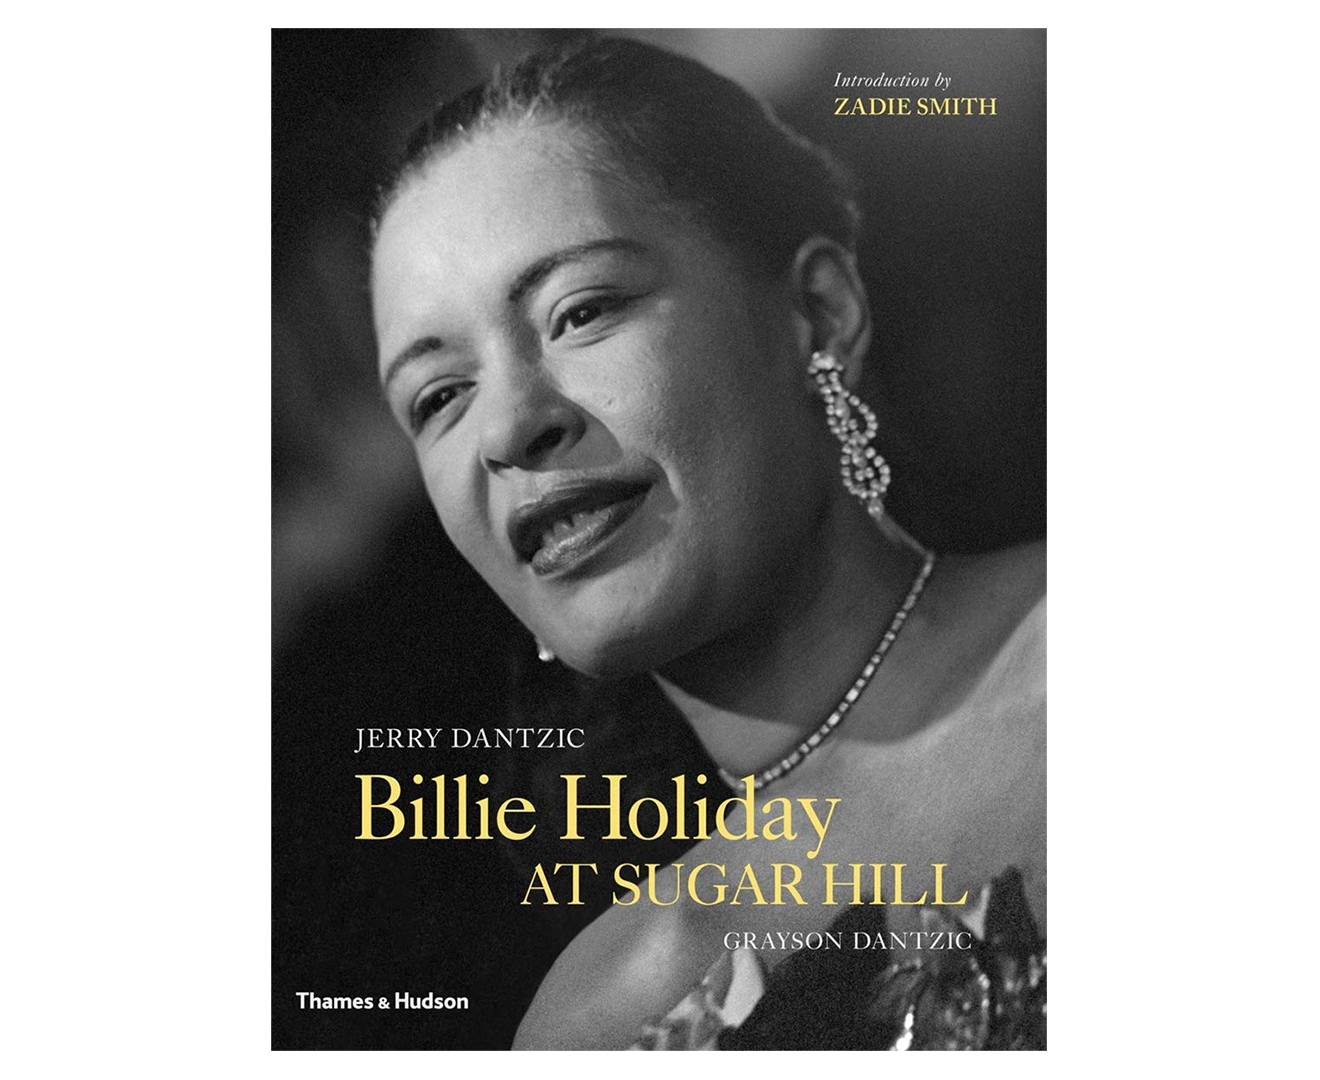 Billie Holiday At Sugar Hill Hardcover Book By Jerry Dantzic And Grayson Dantzic Nz 8095